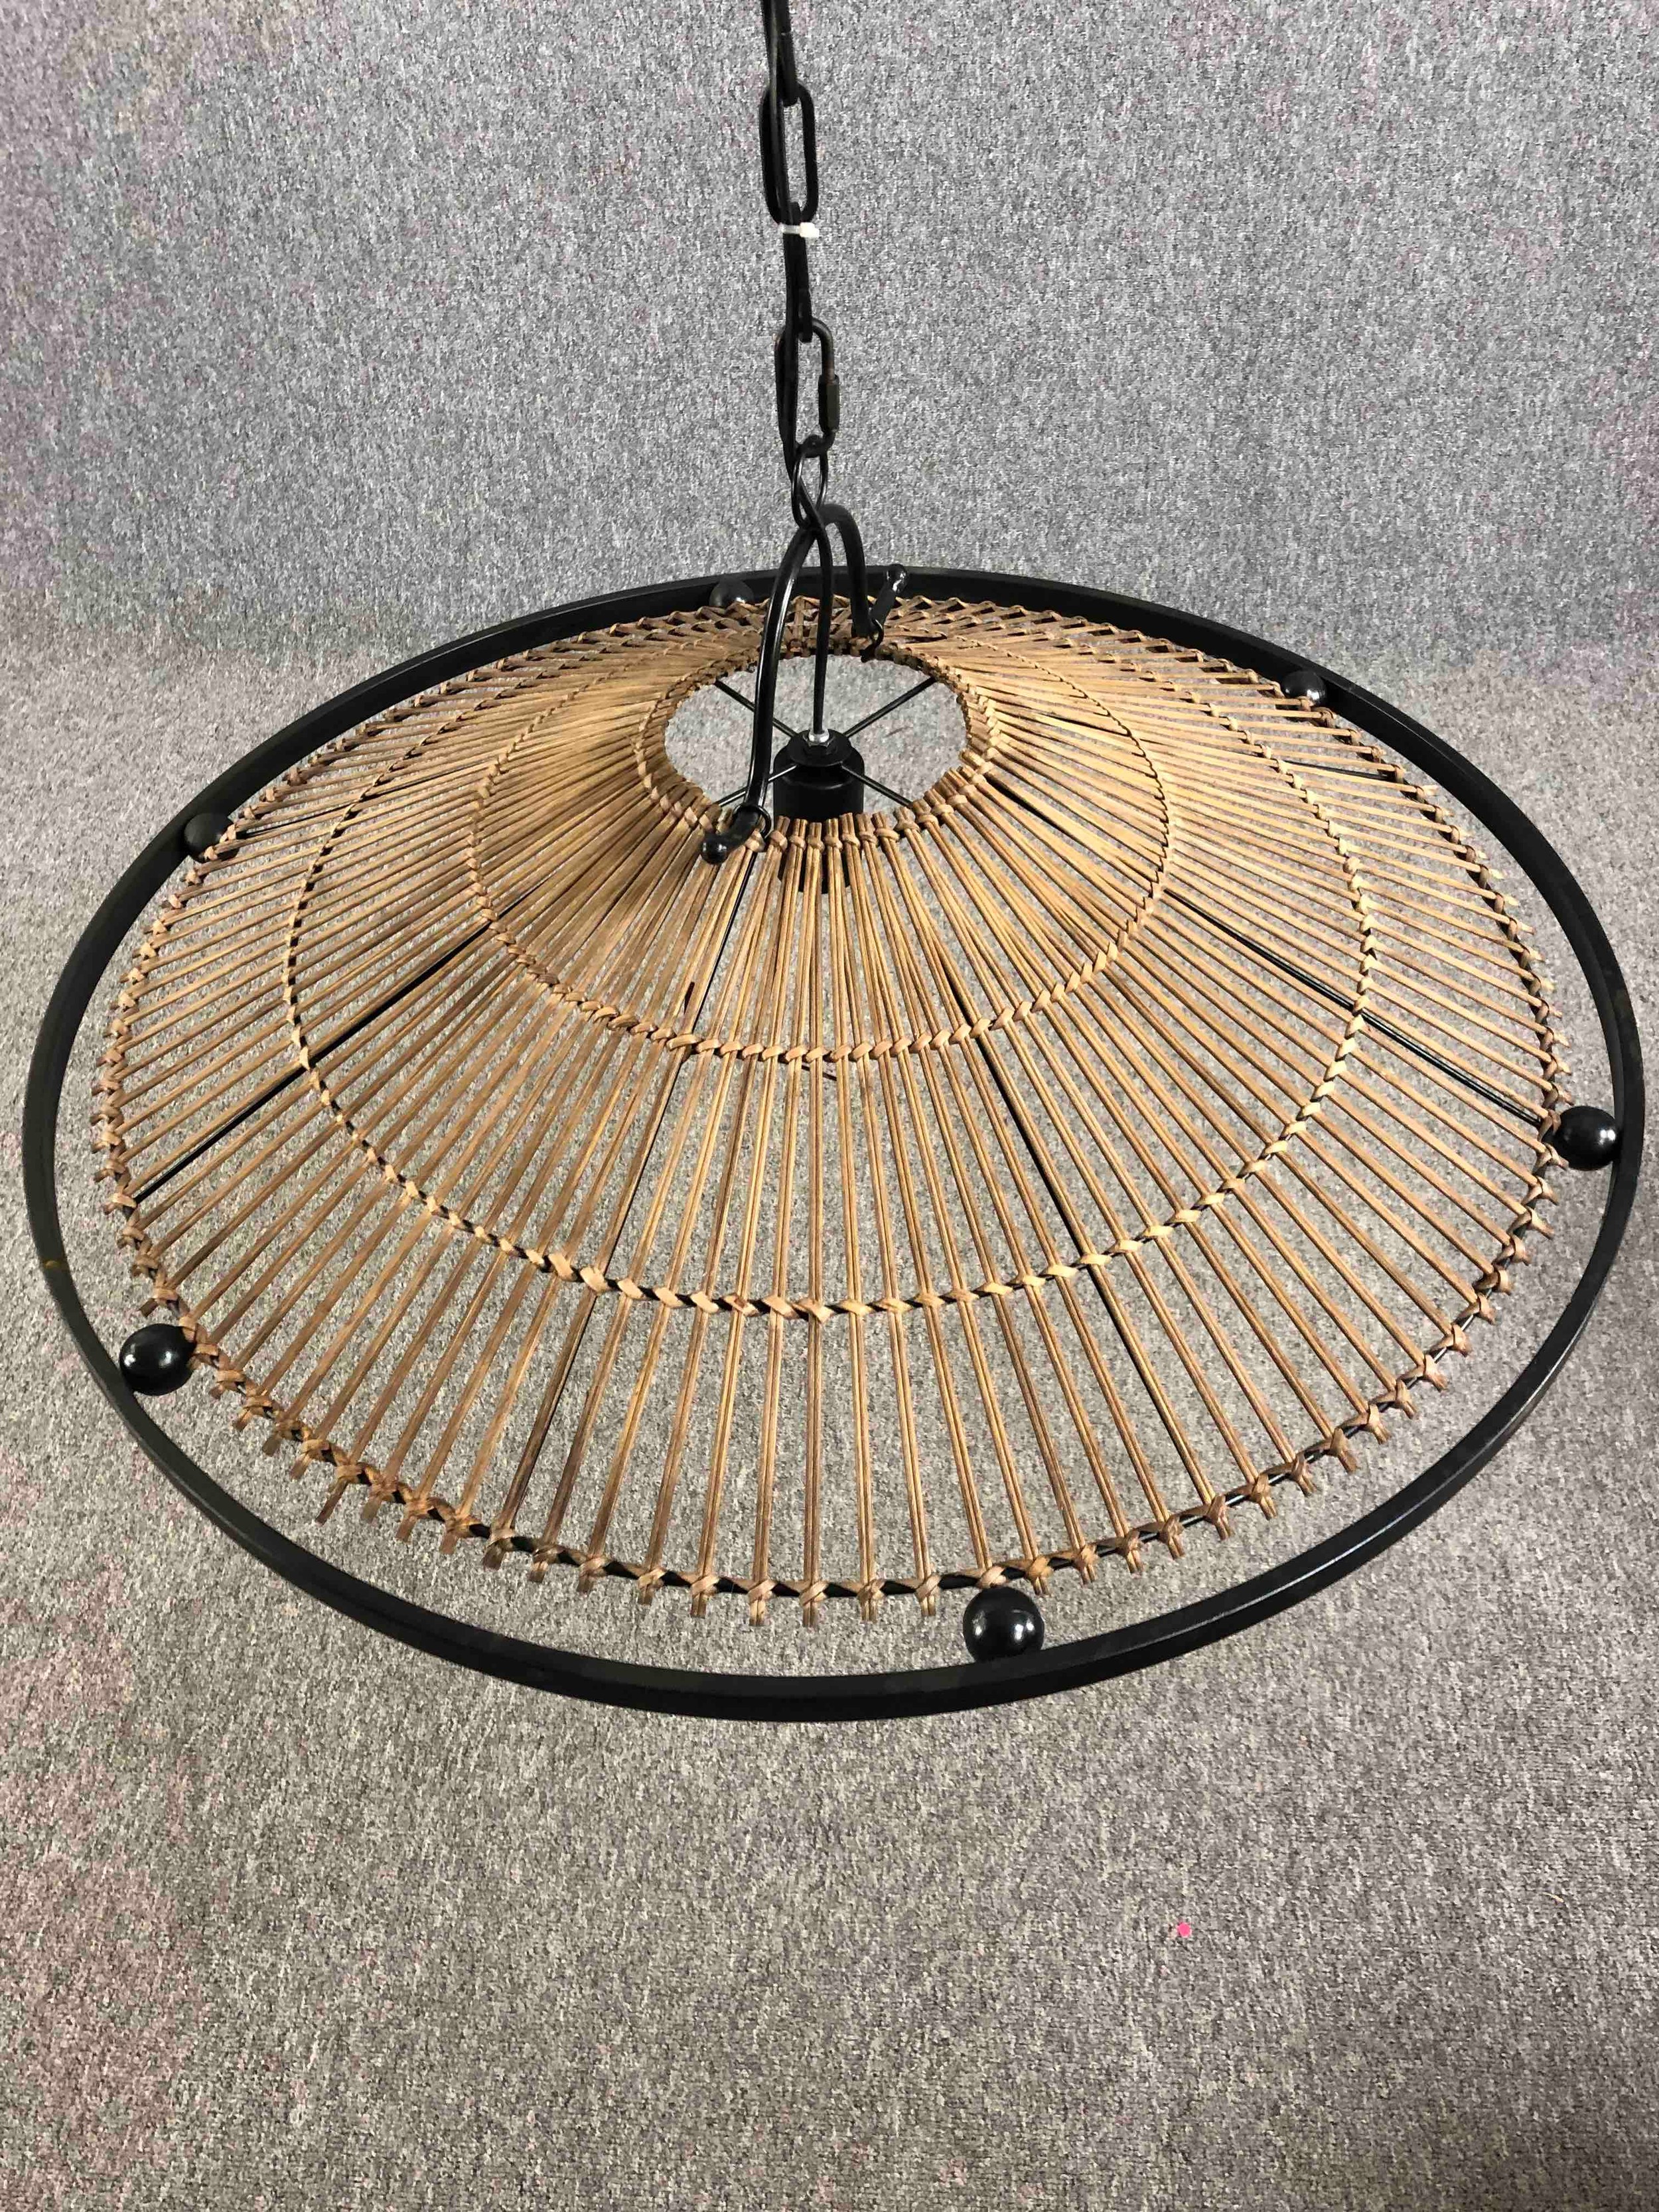 Kindred Lighting. The Mambo natural rattan ceiling pendant. Rattan with a metal surround and - Image 3 of 4